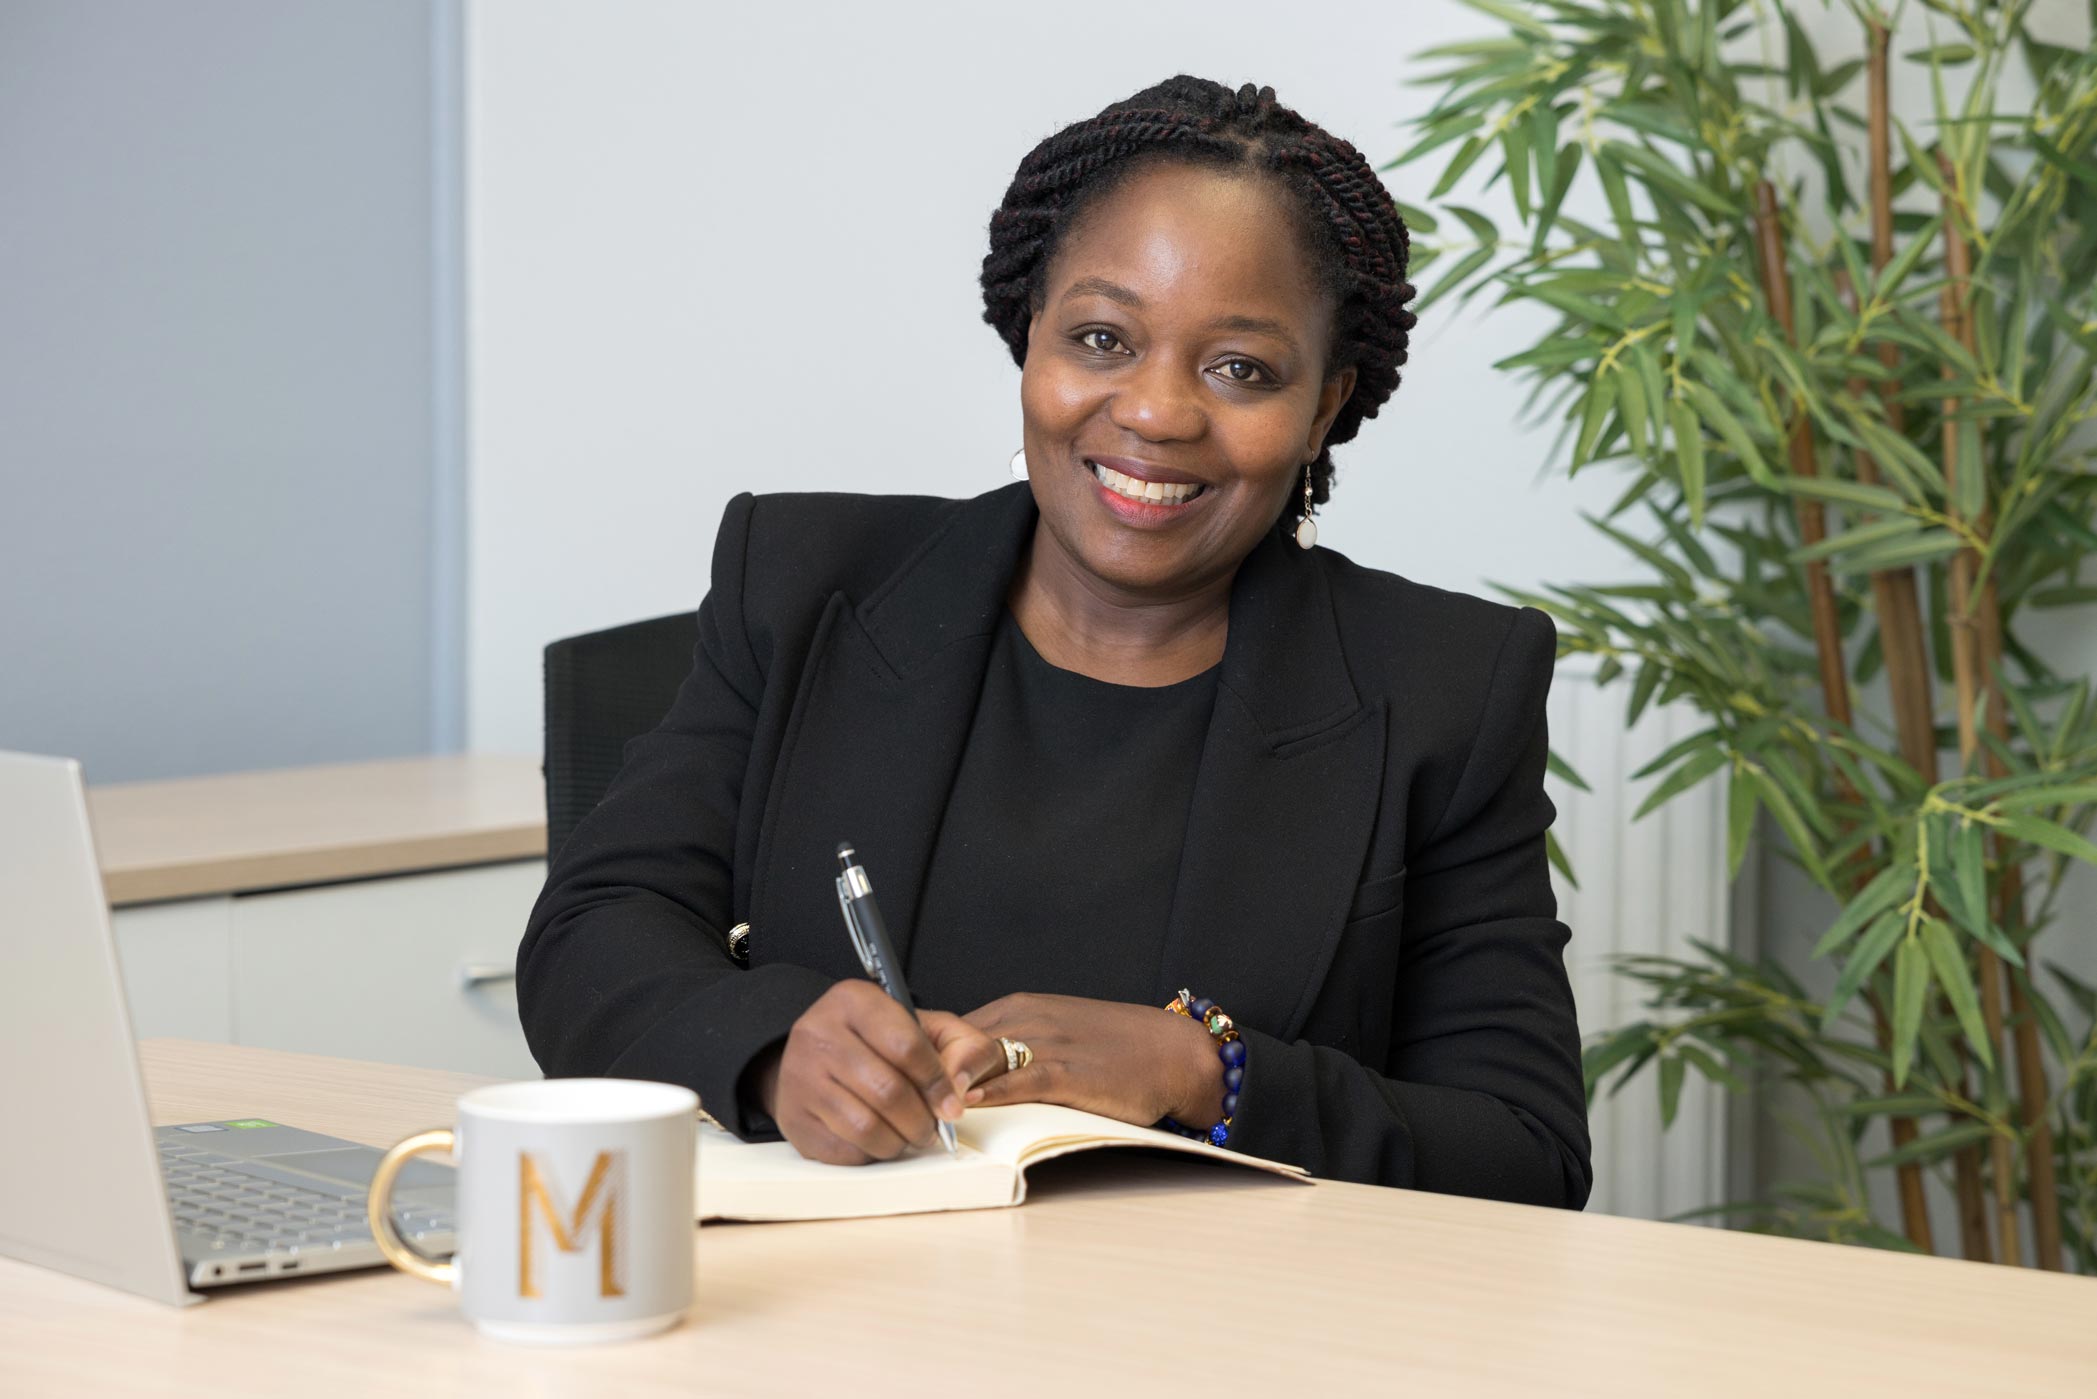 A woman smiles at the camera whilst she is working during her Croydon personal branding photography shoot